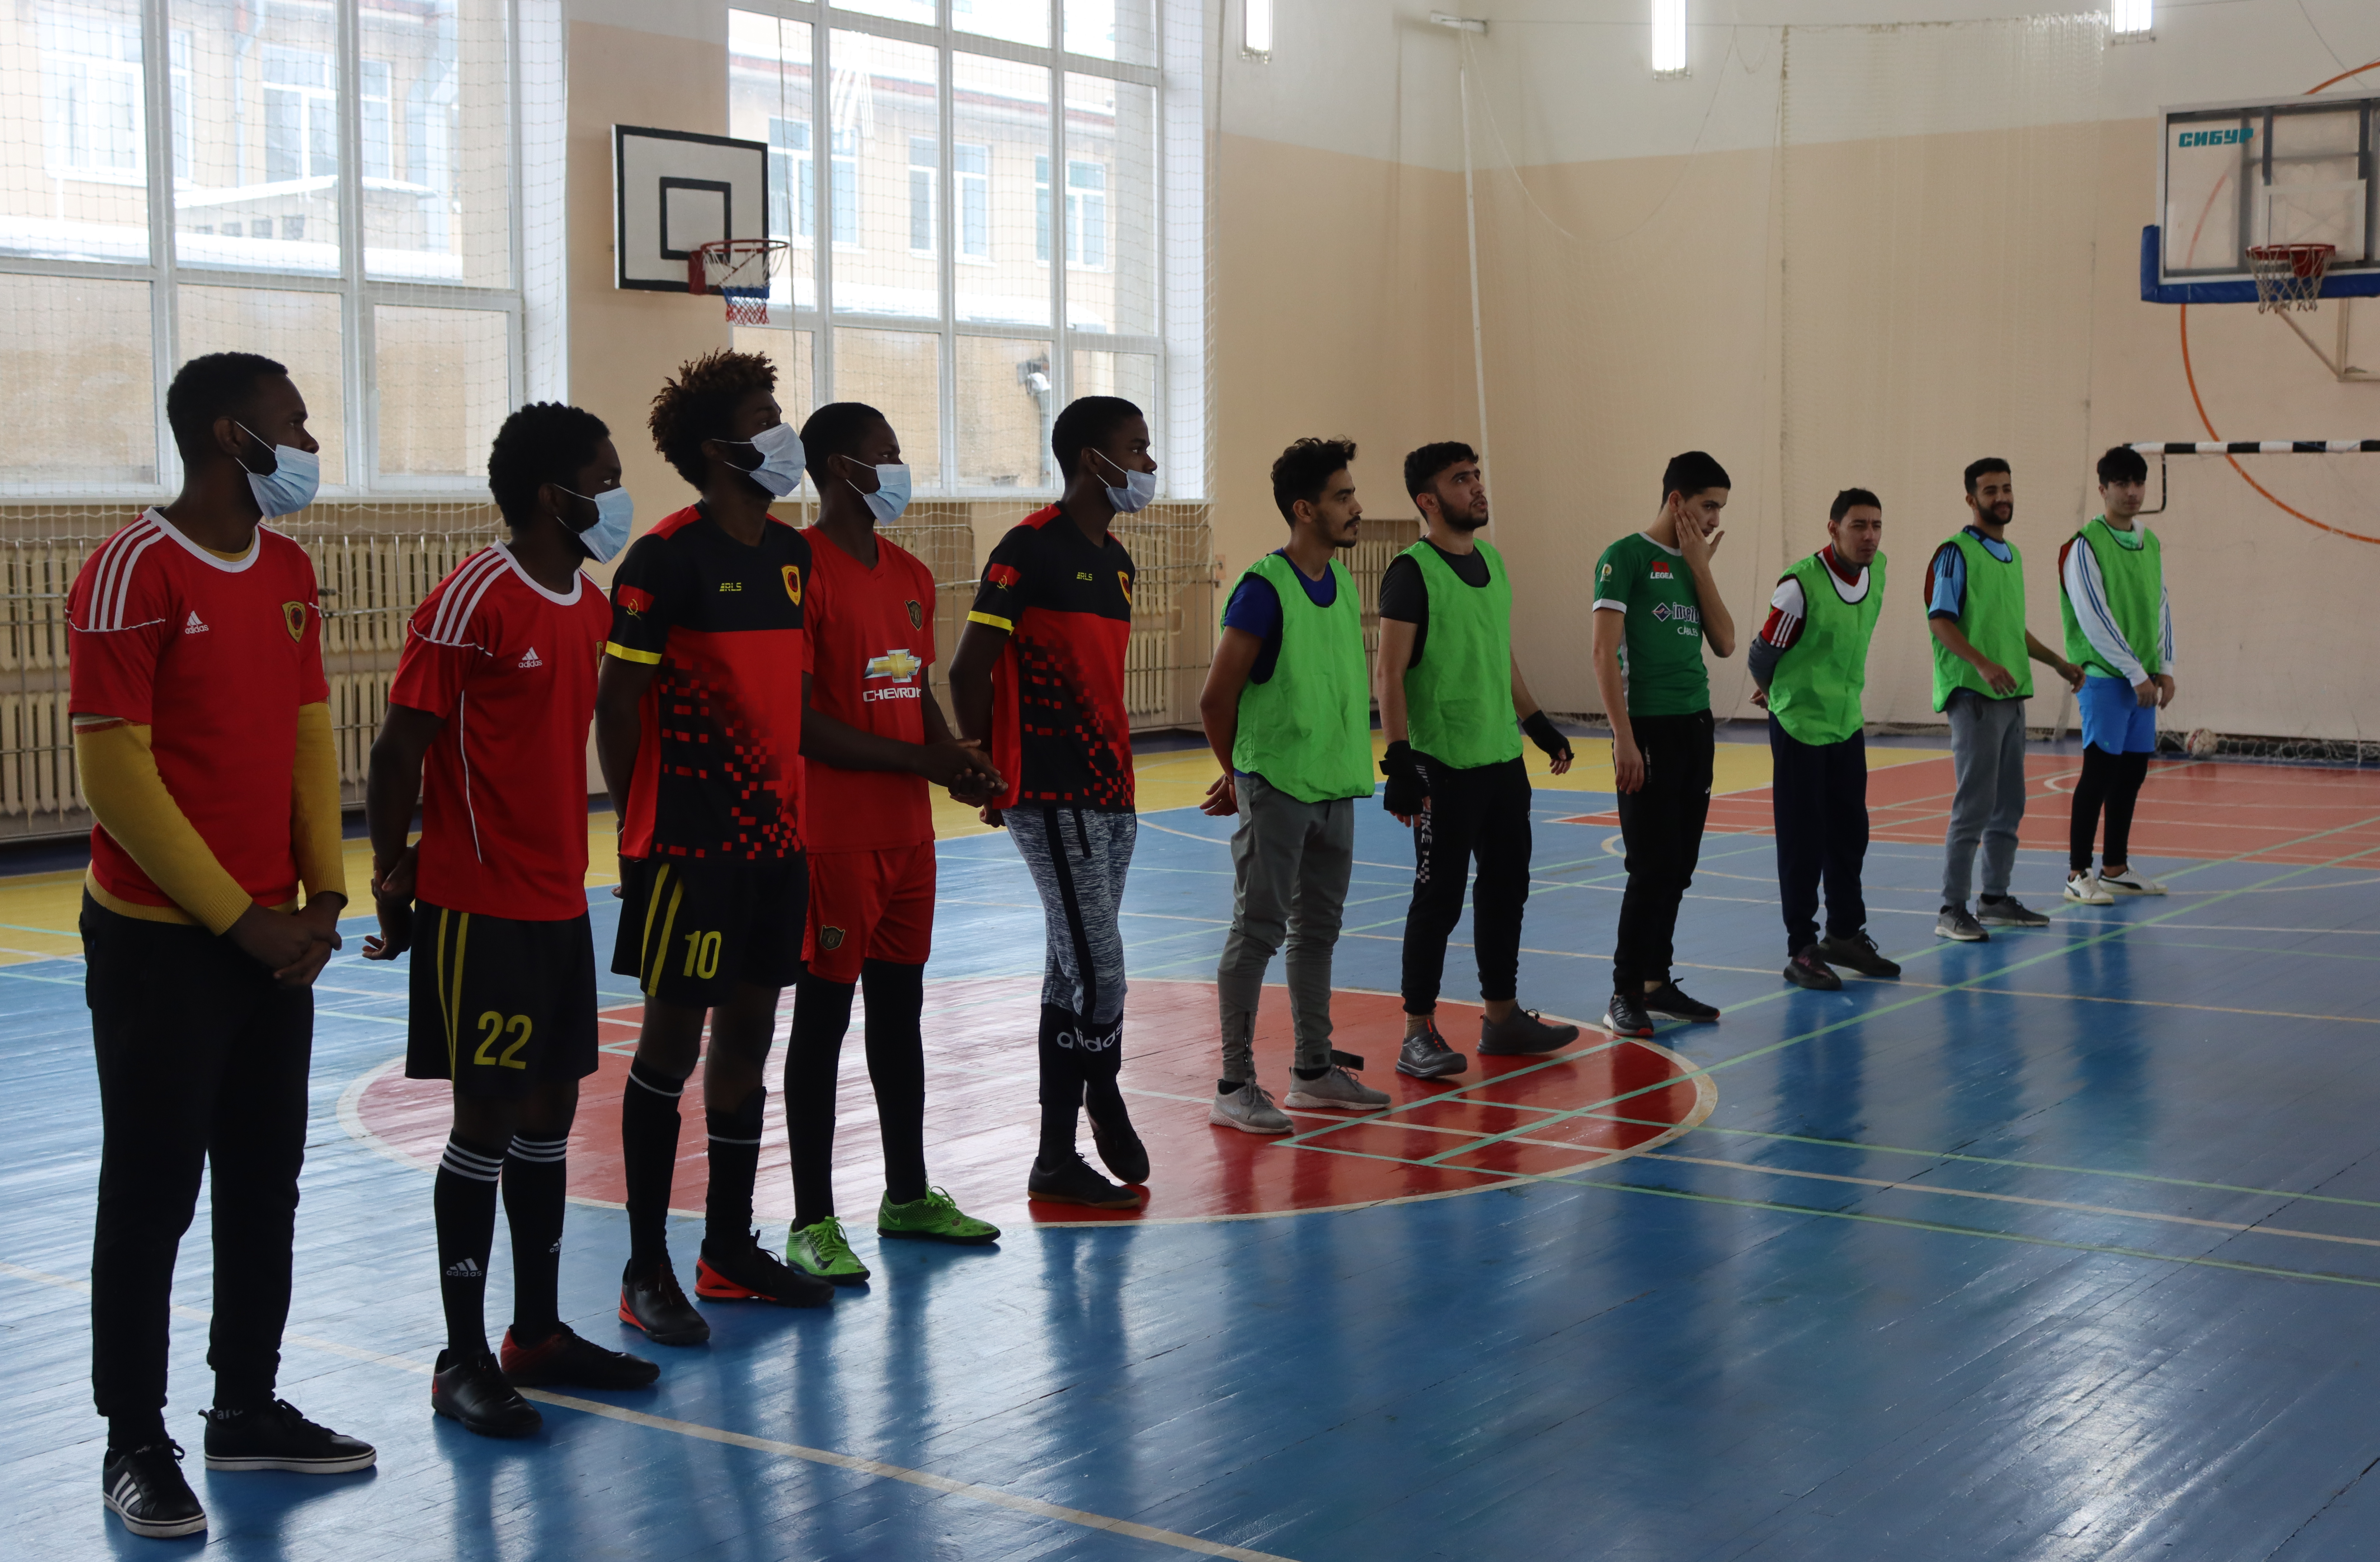 Voronezh State University of Engineering Technologies organized a futsal tournament for foreign students